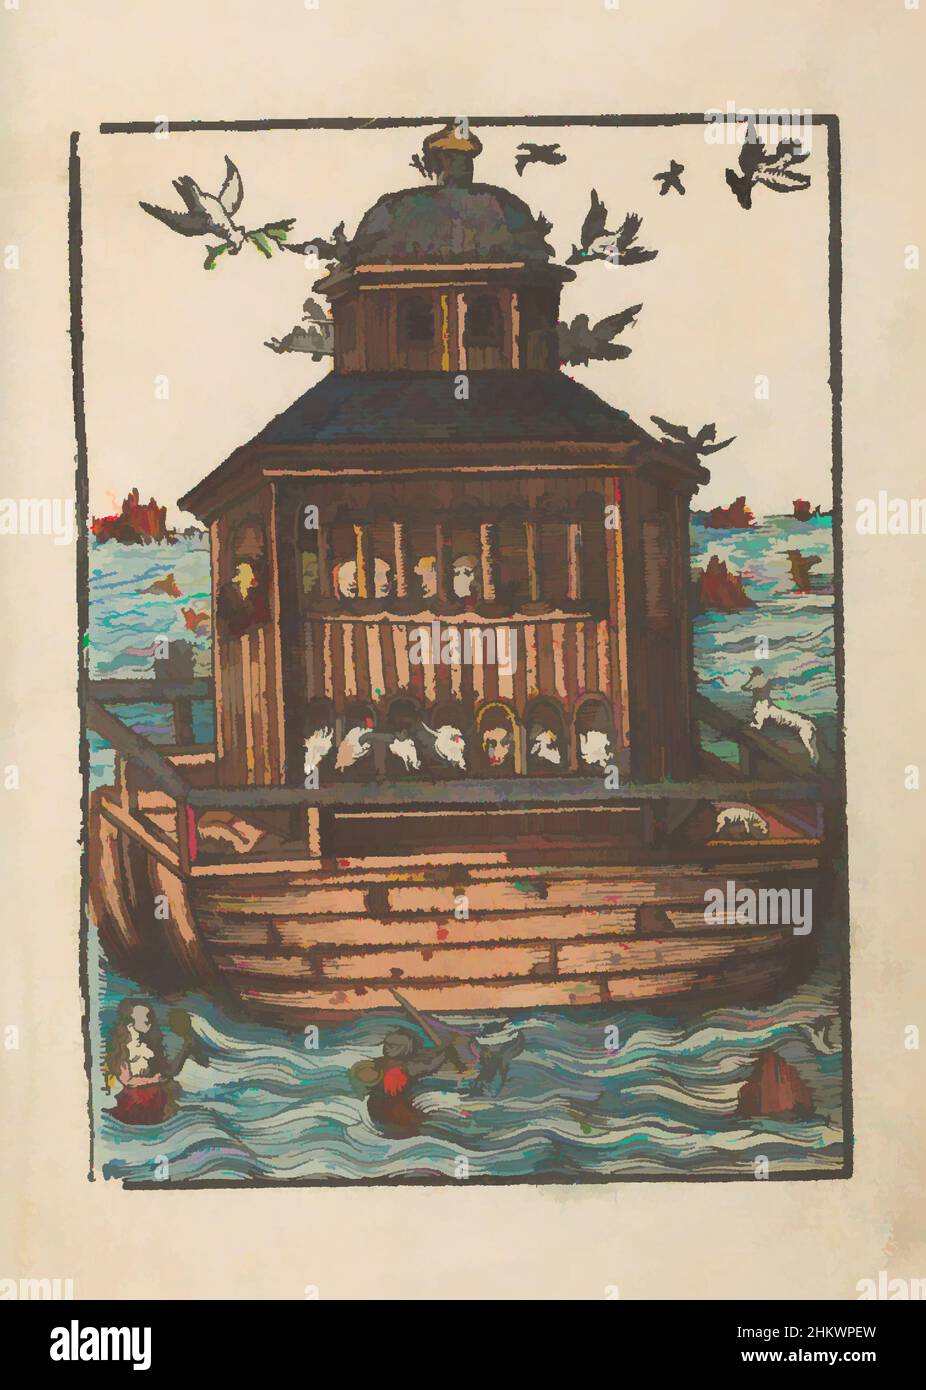 Art inspired by Noah's Ark, Stupid Passion (series title), Noah's ark floats on the waters of the flood. In the water a mermaid and merman. In the sky birds including the dove with a twig. Print is part of a book., print maker:, publisher: Doen Pietersz., Amsterdam, c. 1530, paper, Classic works modernized by Artotop with a splash of modernity. Shapes, color and value, eye-catching visual impact on art. Emotions through freedom of artworks in a contemporary way. A timeless message pursuing a wildly creative new direction. Artists turning to the digital medium and creating the Artotop NFT Stock Photo